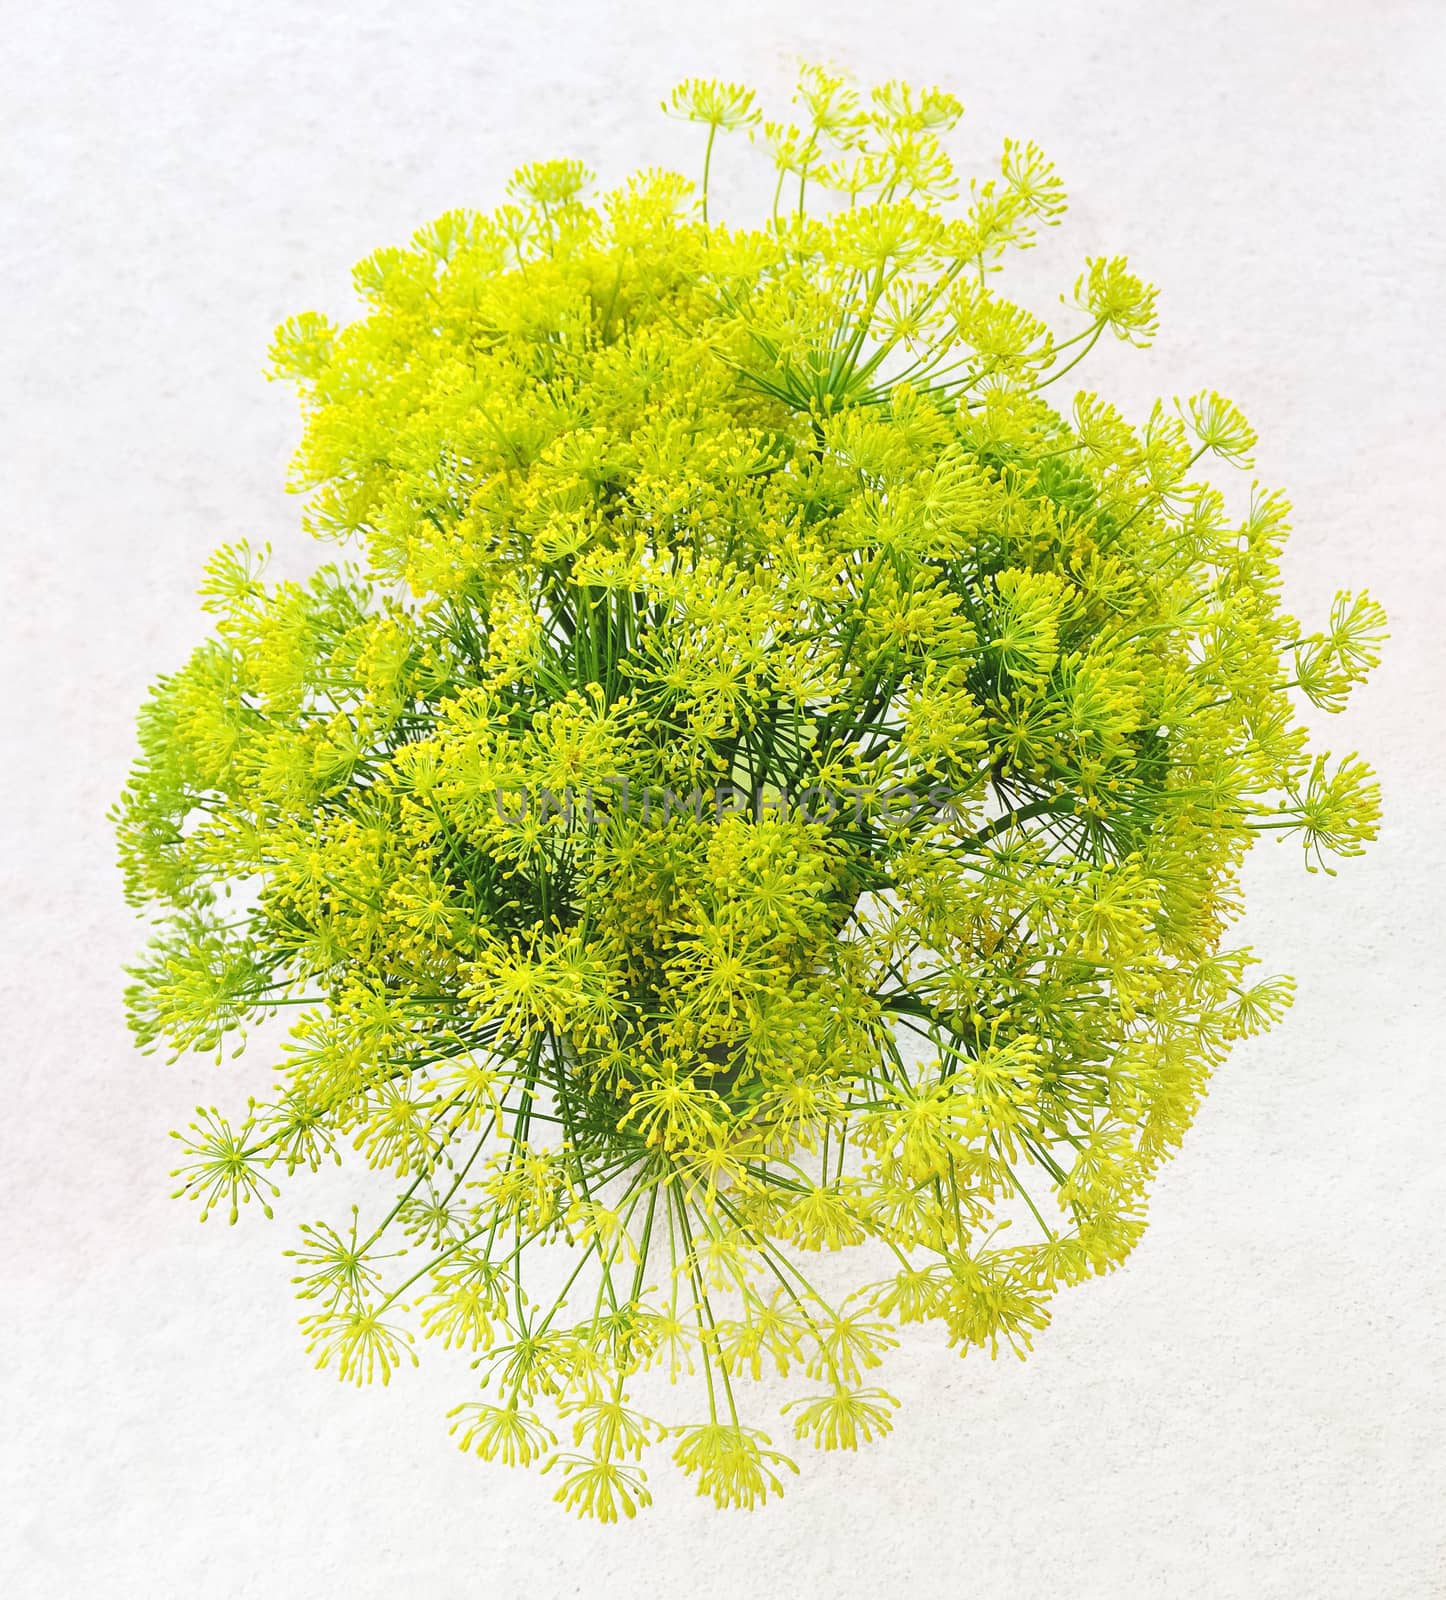 Bouquet of fresh blooming dill on white background by anikasalsera